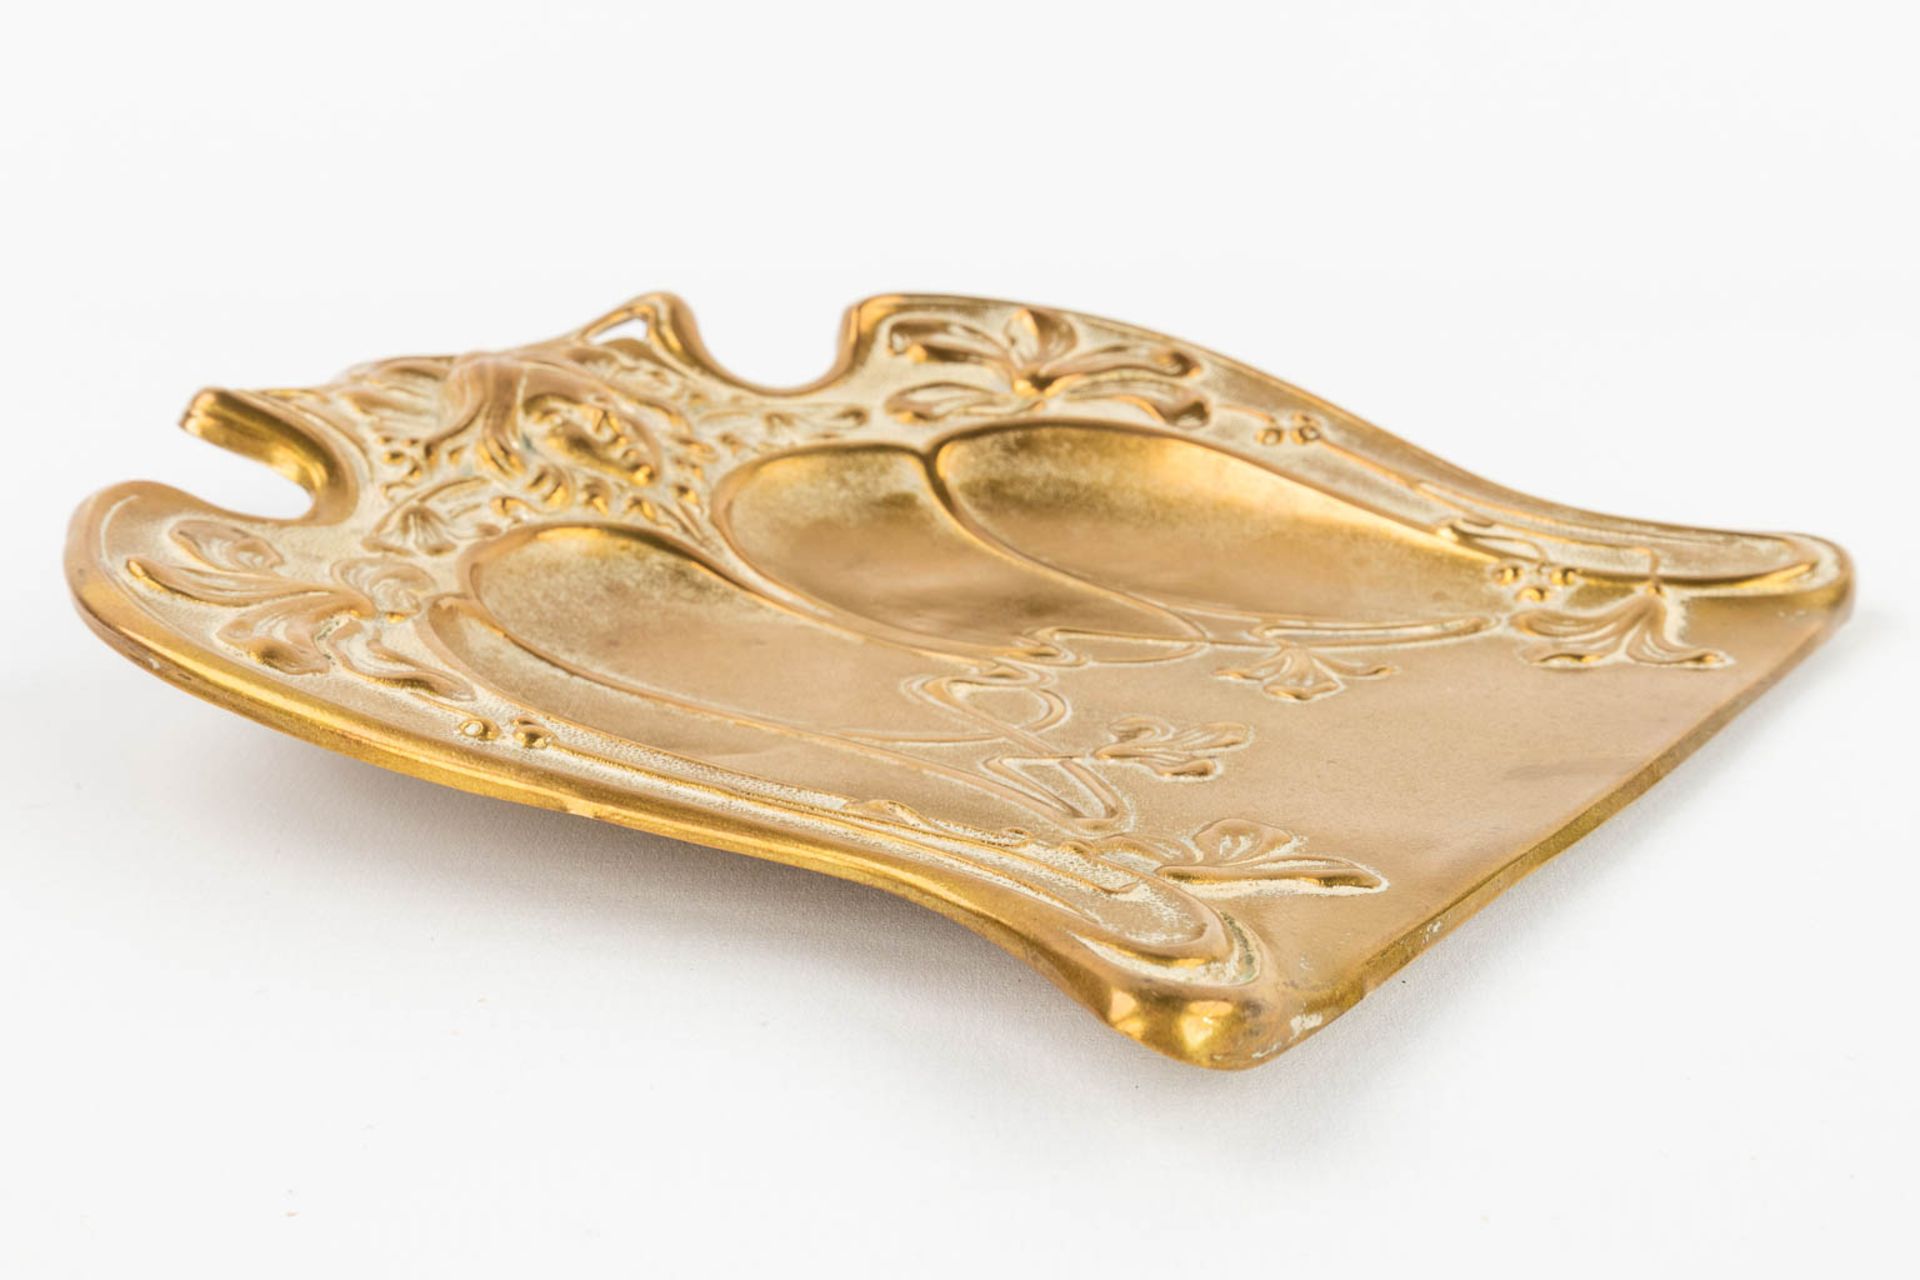 A collection of trays and table accessories made of copper in art nouveau style (L:43 x W:27 cm) - Bild 5 aus 17